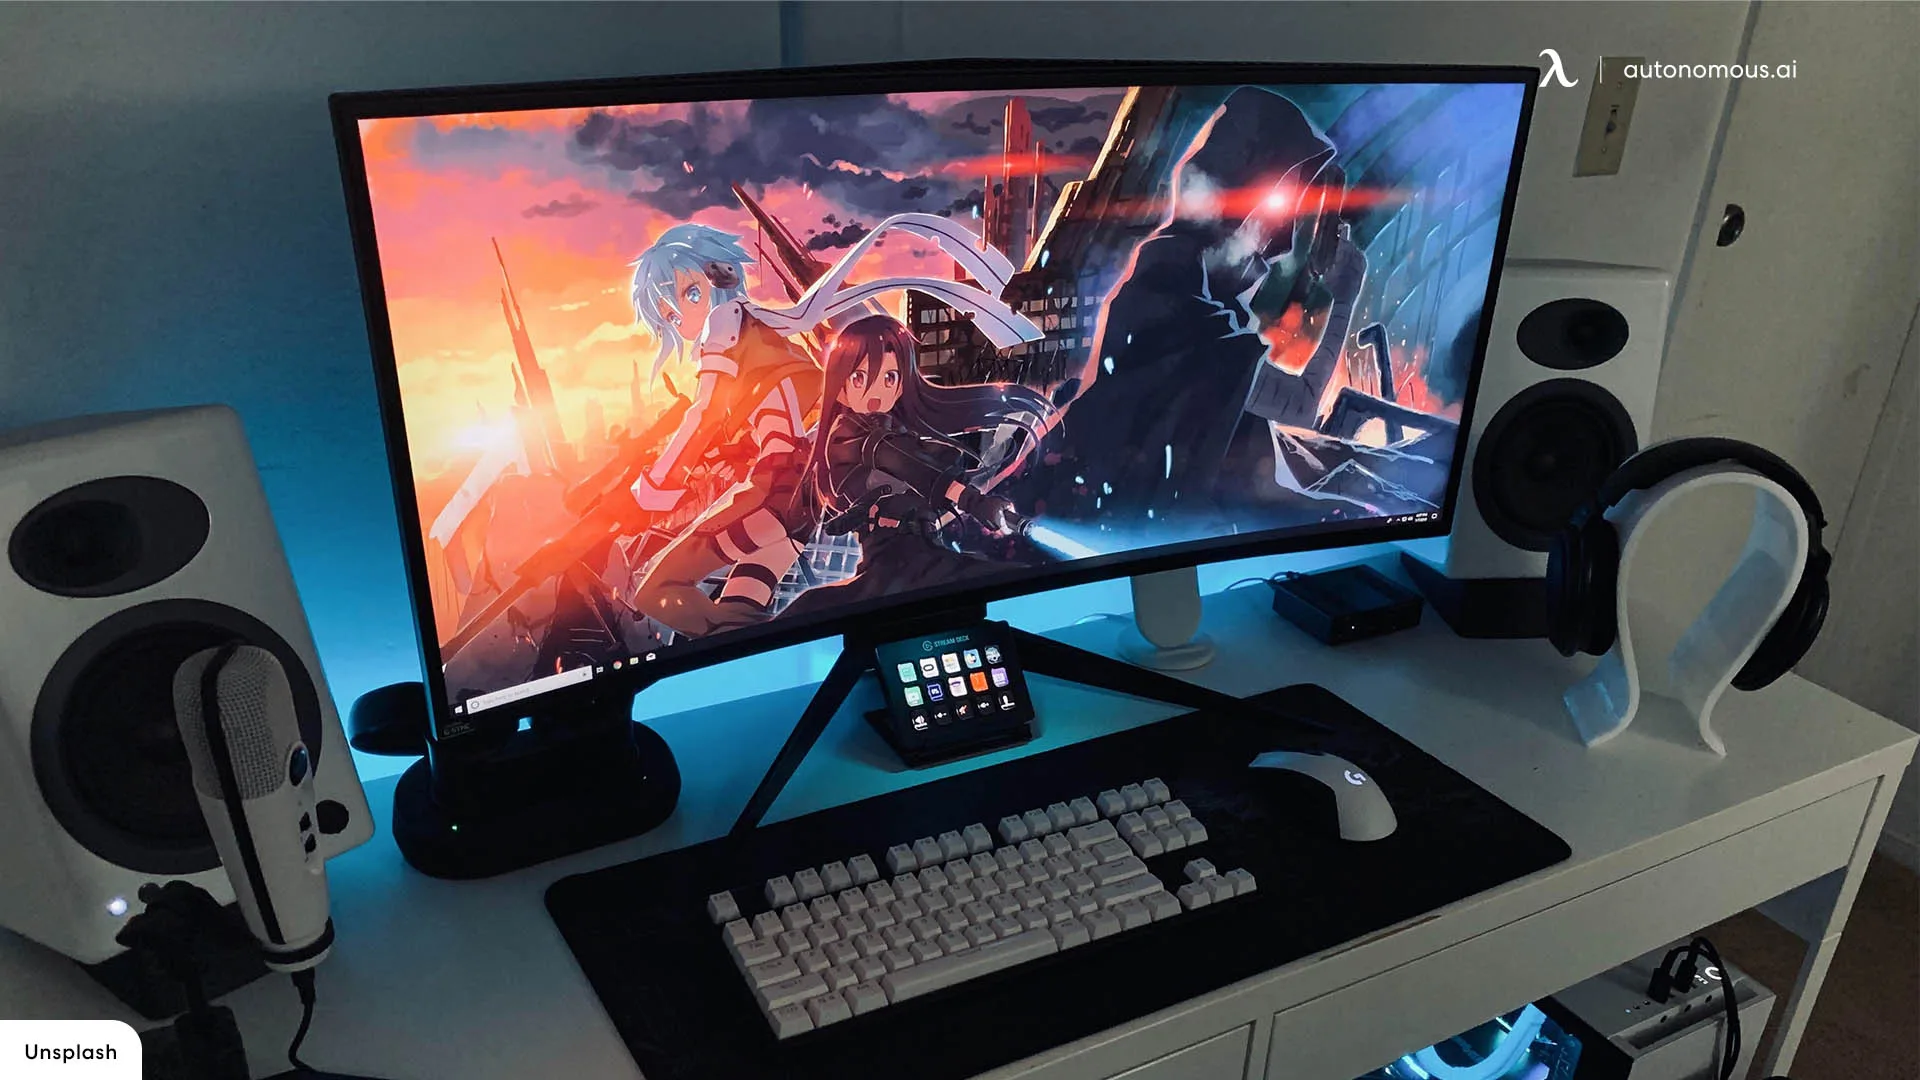 What Is a Curved Monitor?